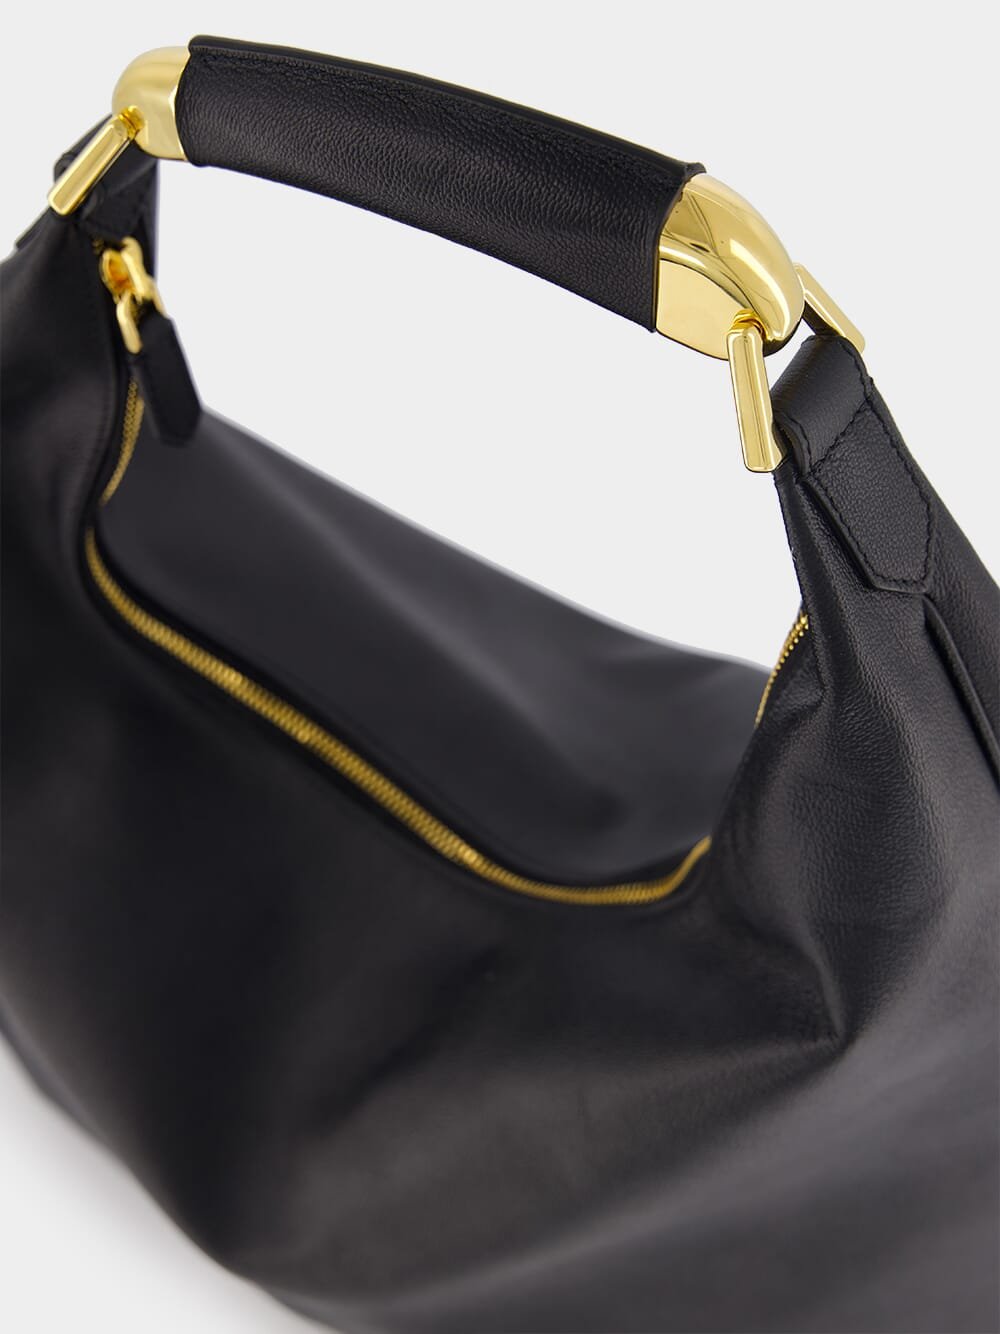 Tom FordGrain Leather Bianca Large Hobo at Fashion Clinic